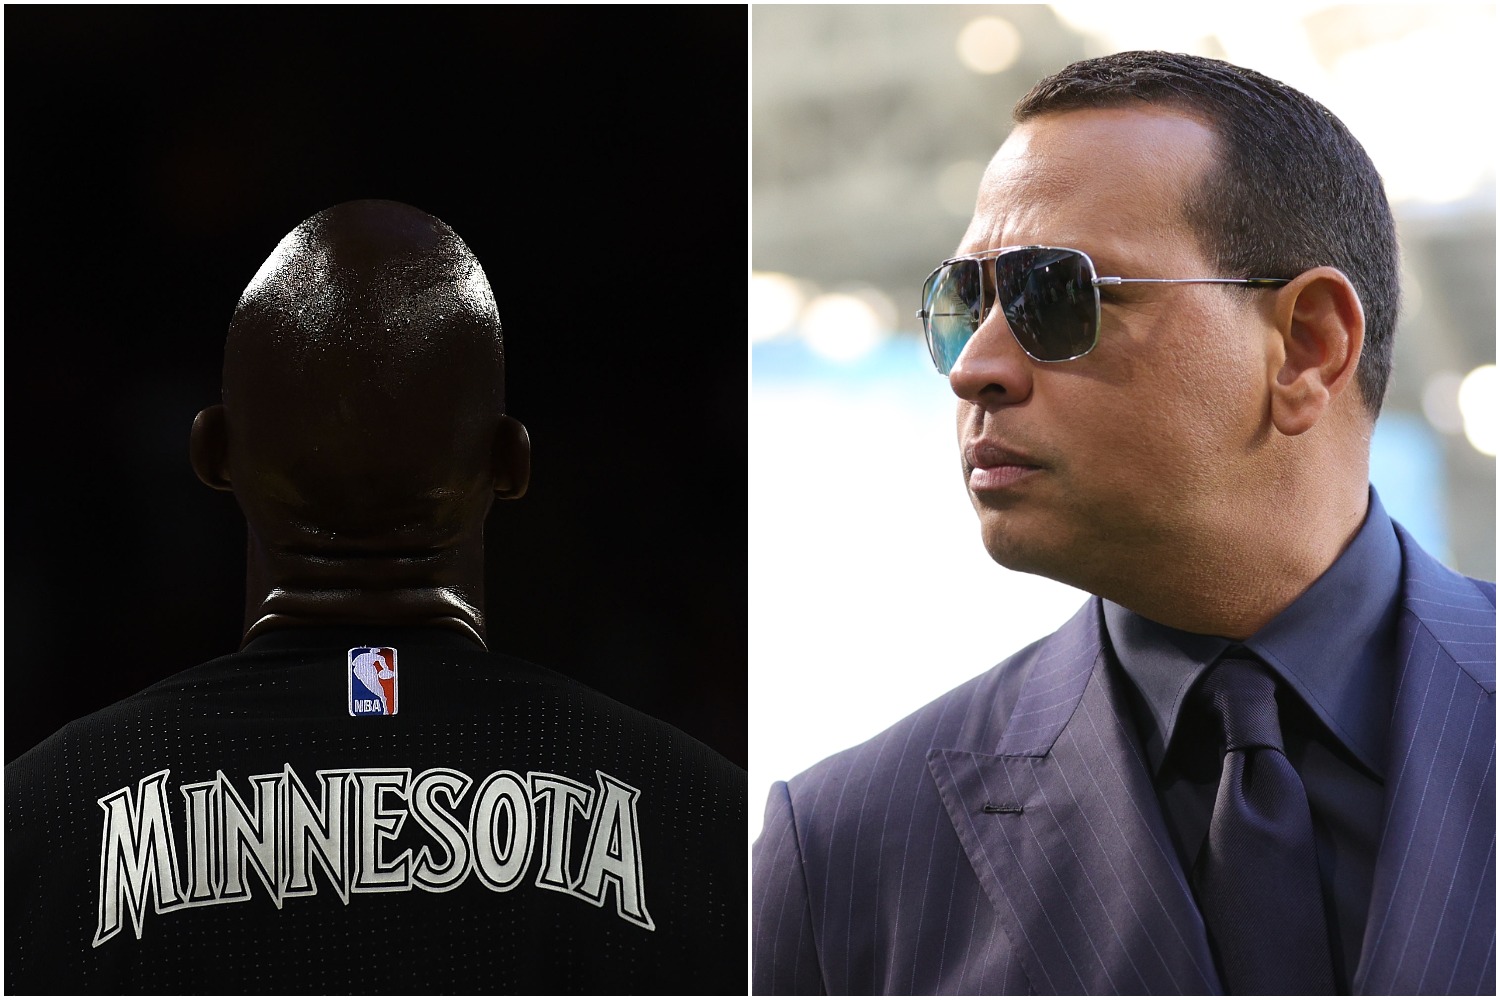 Kevin Garnett stands with his back turned as Alex Rodriguez looks on.